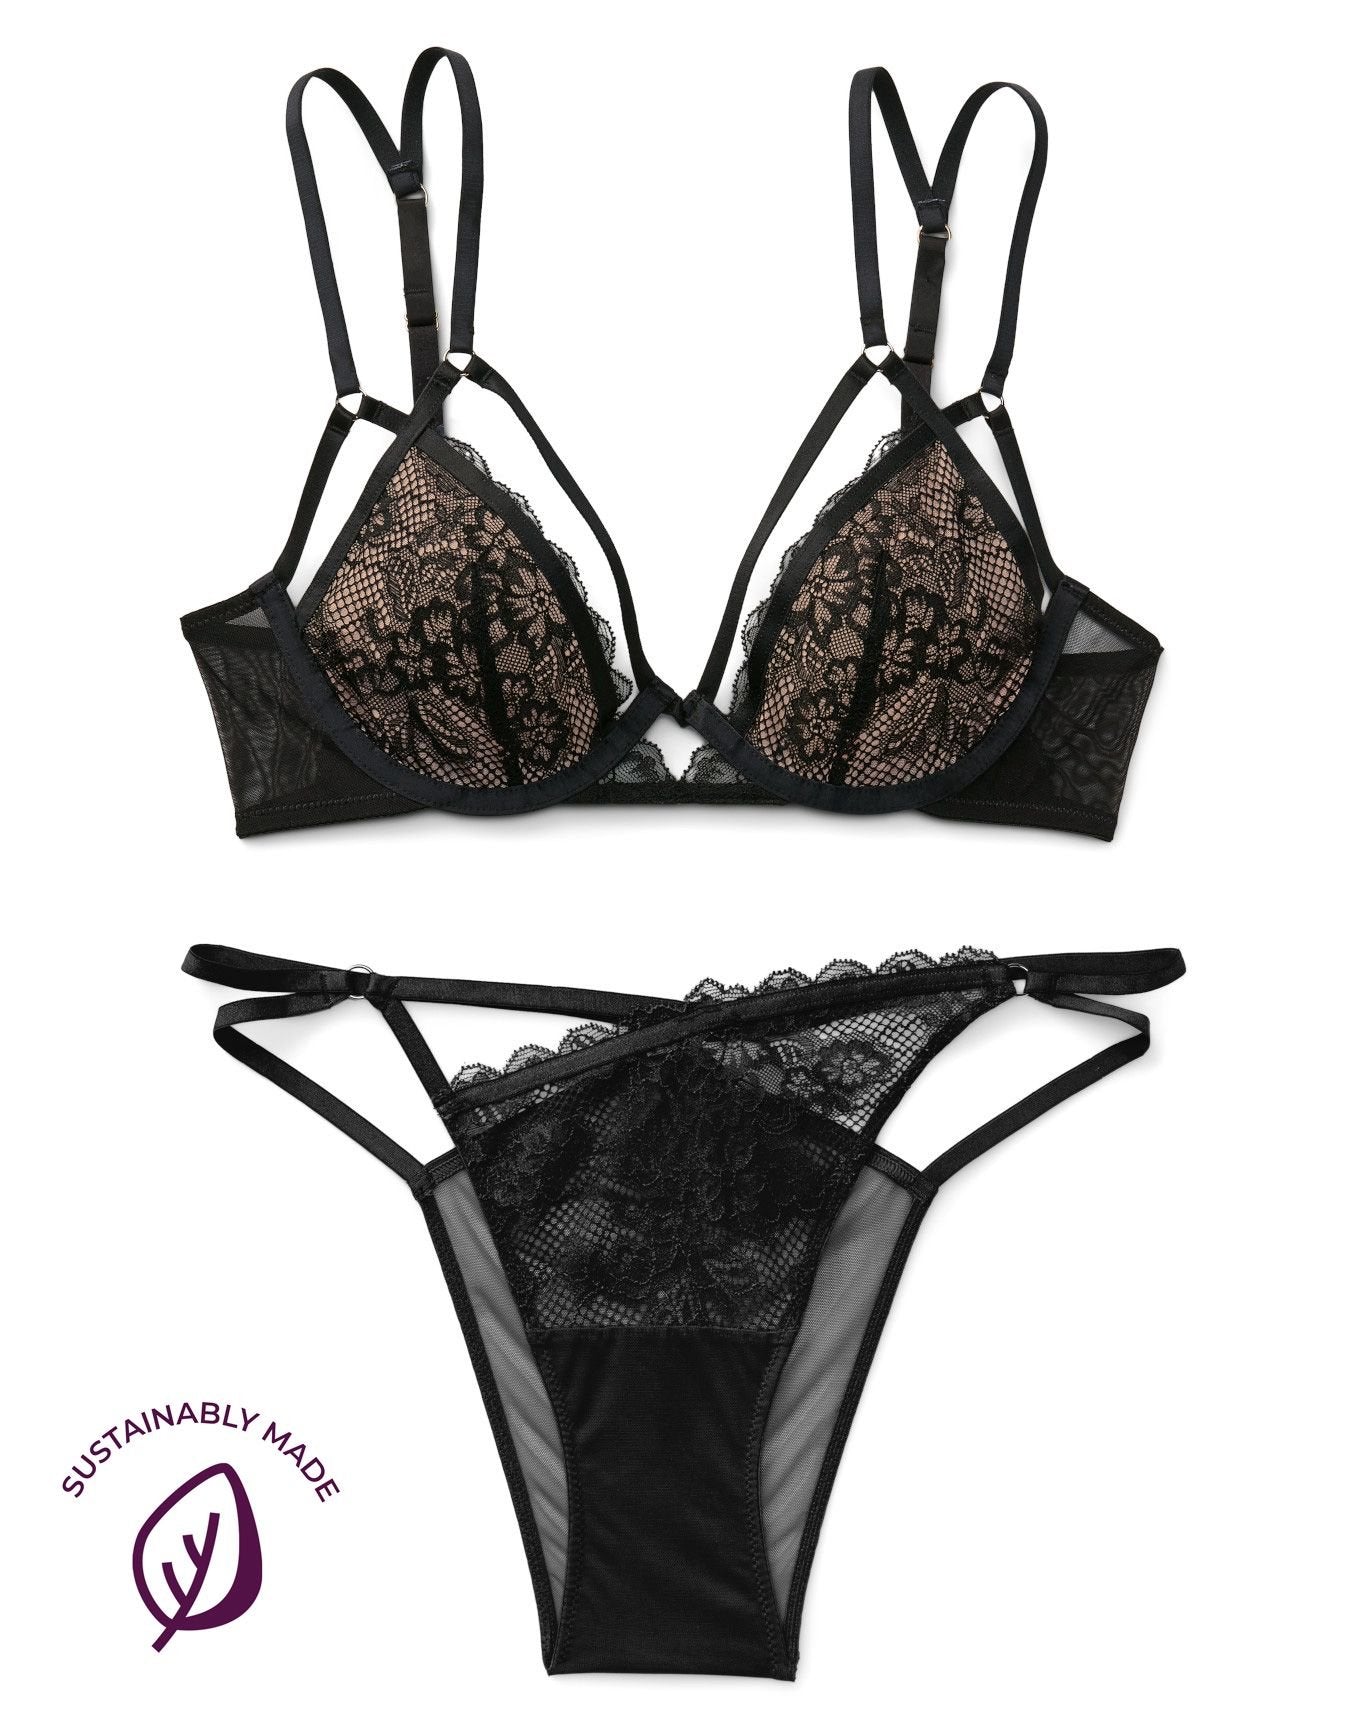 Adore Me Vianna Unlined Plunge in color Jet Black and shape plunge